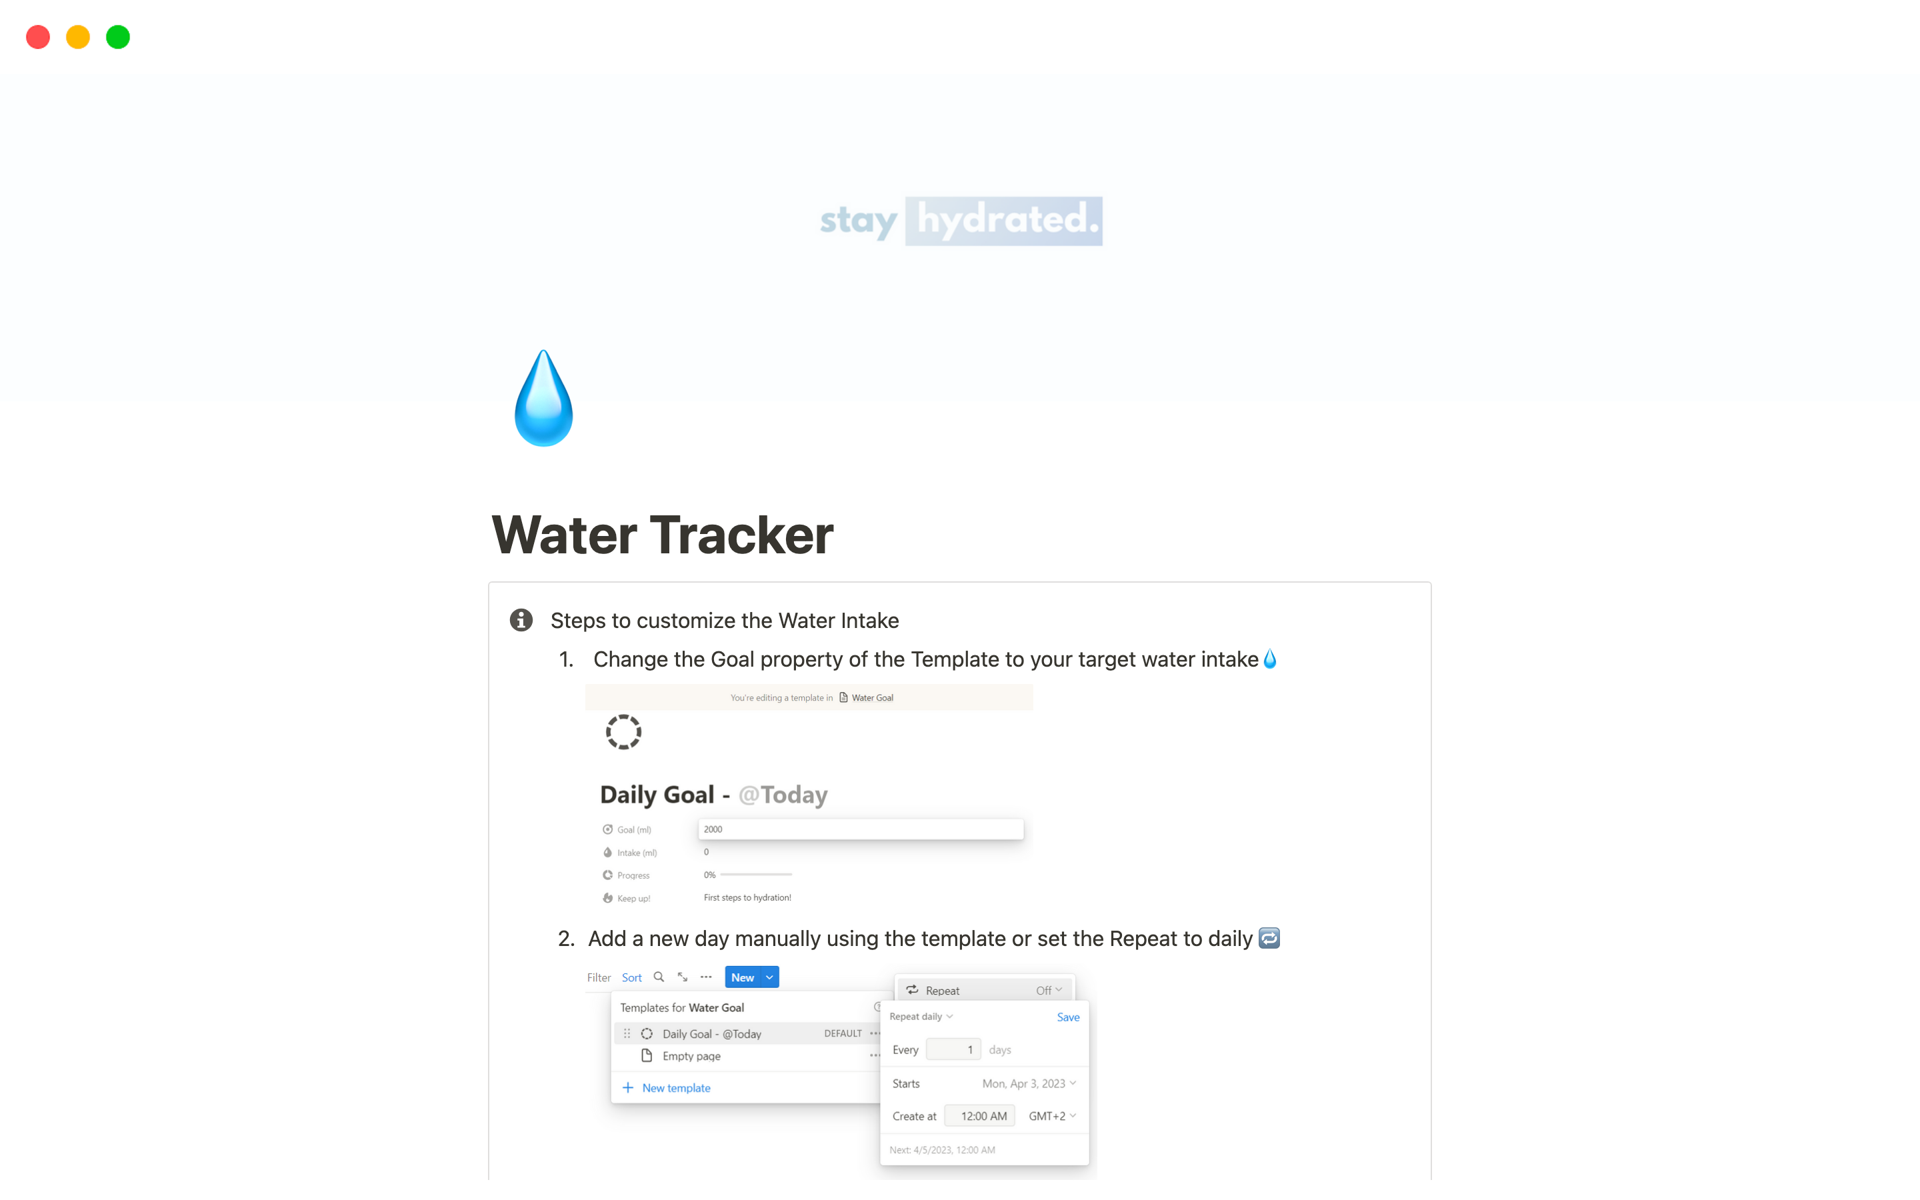 Hydrate for success with the Water Tracker Notion Template - effortlessly monitor intake, gain insights, set reminders, visualize data, and customize for your goals. Start your journey to a healthier lifestyle now!